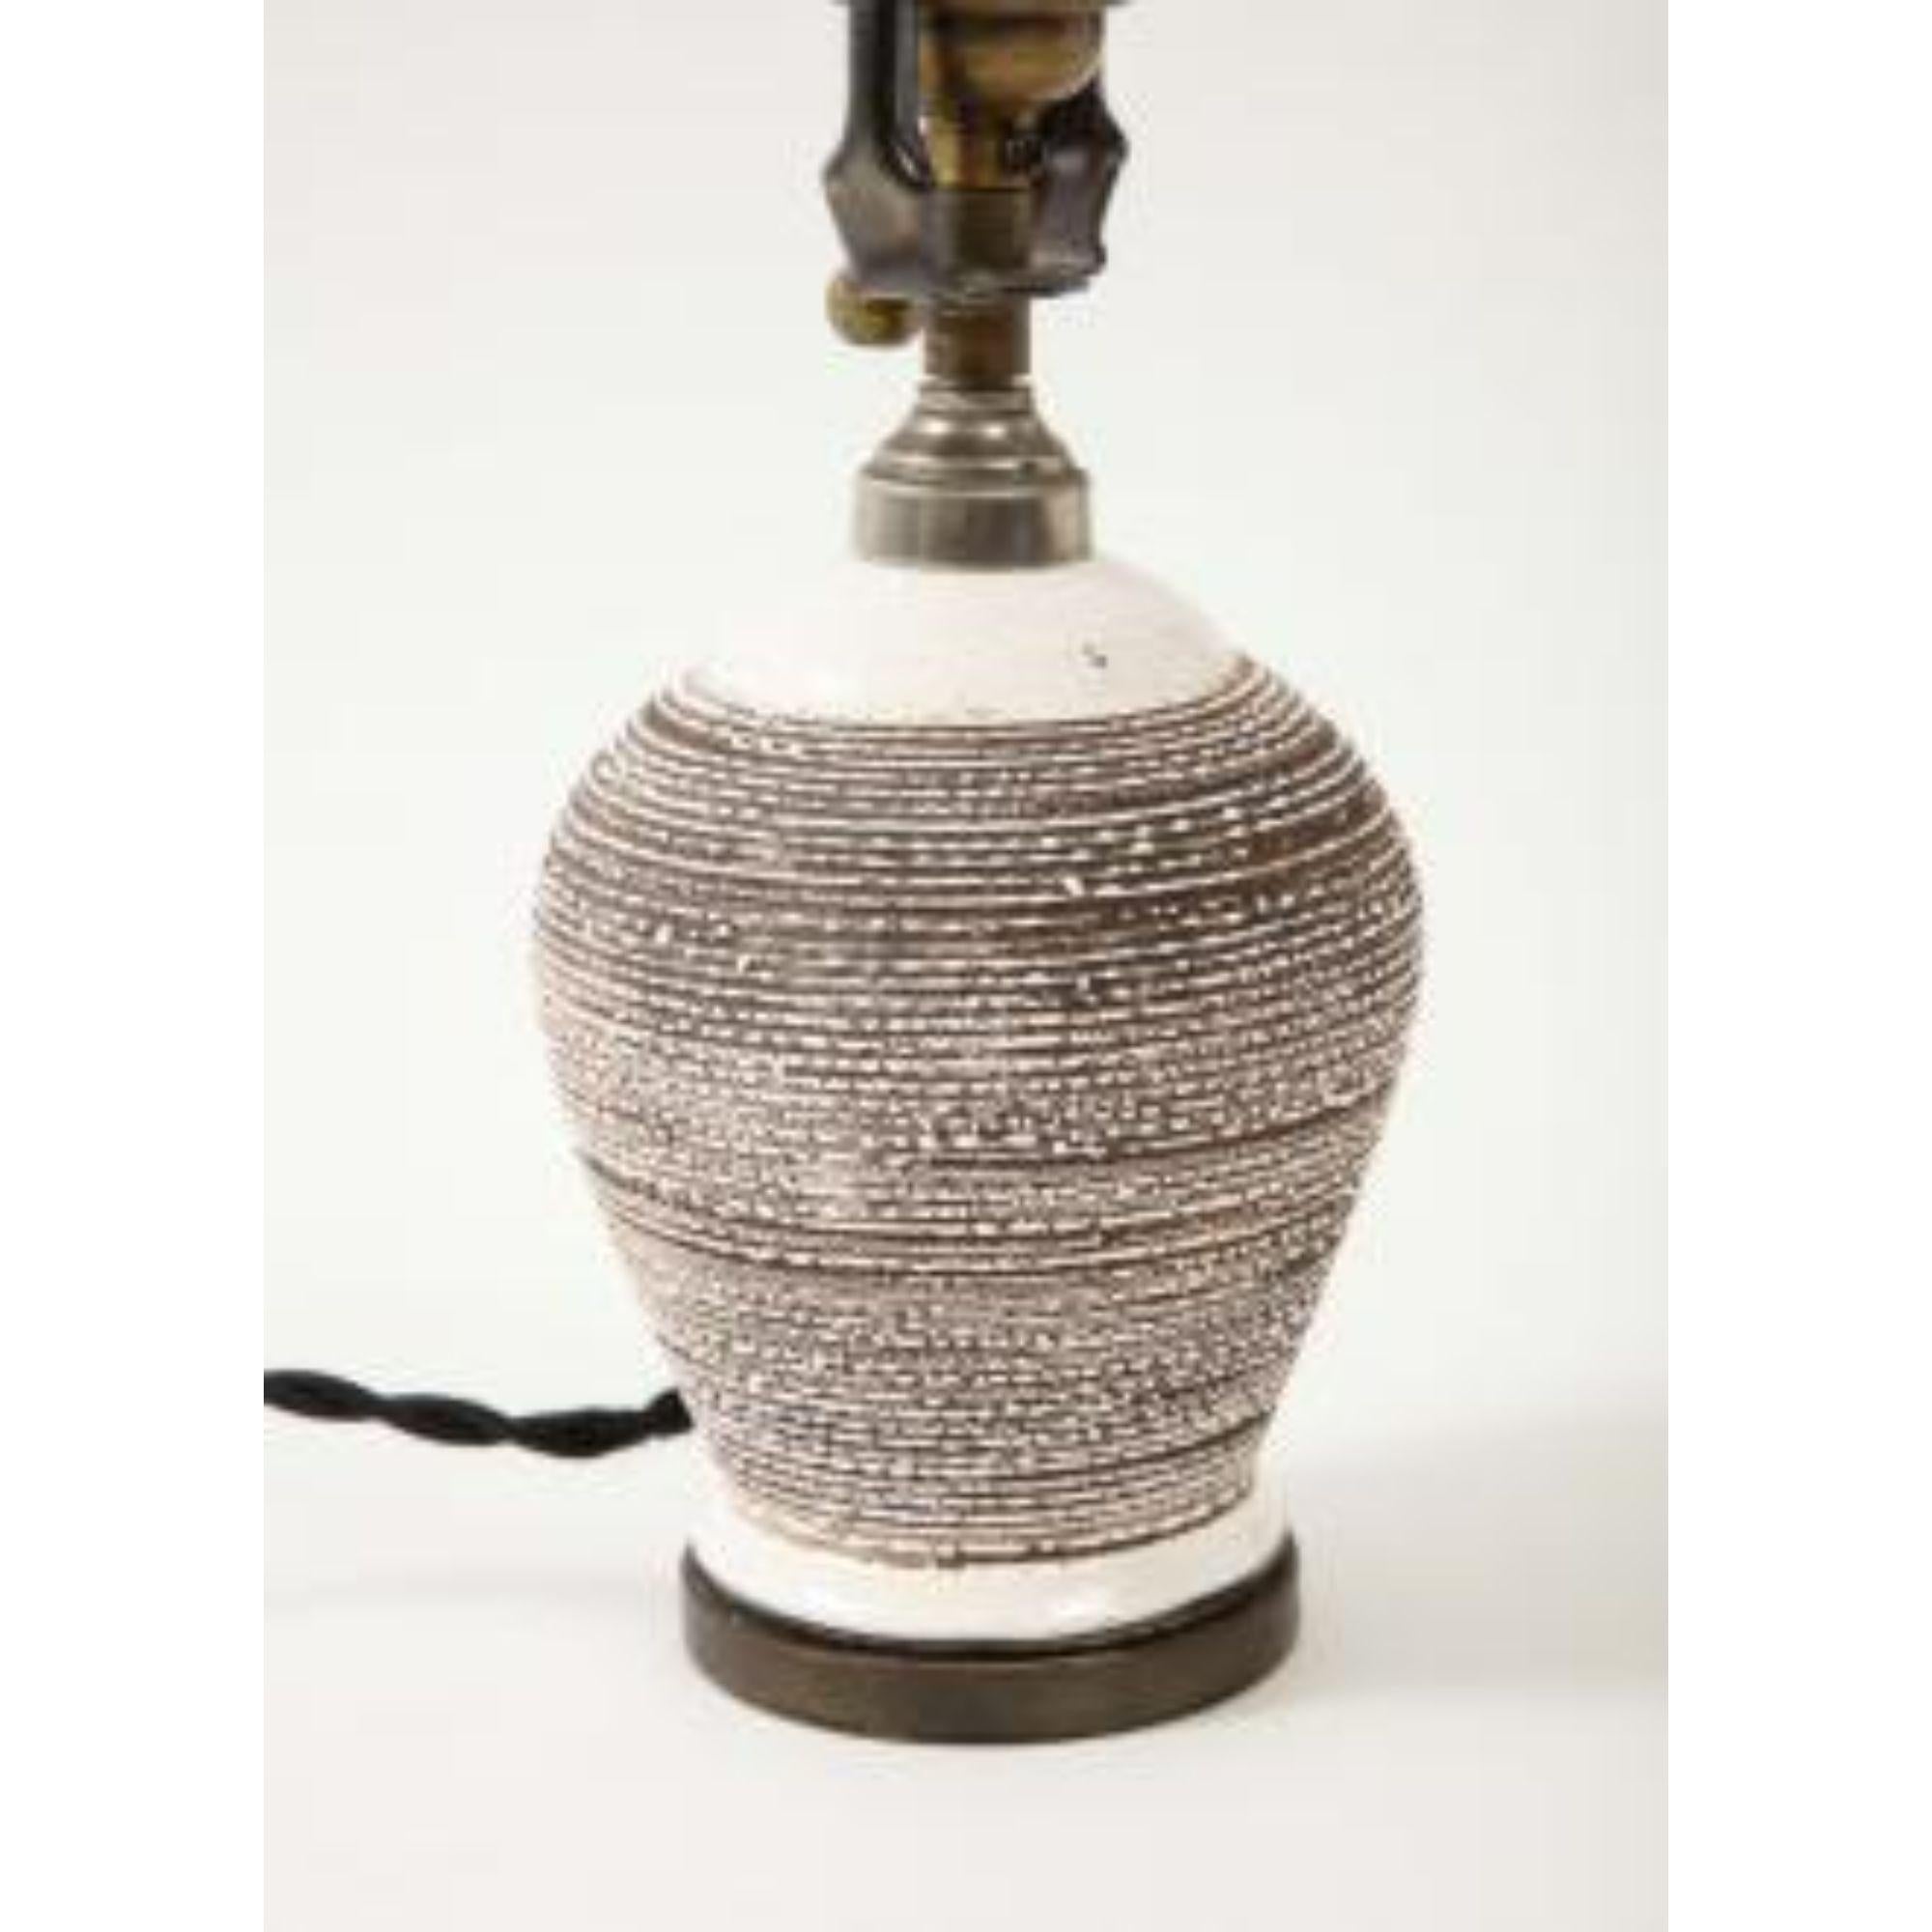 Brown/White Textured Glazed Ceramic & Bronze Table Lamp, 20th Century For Sale 1